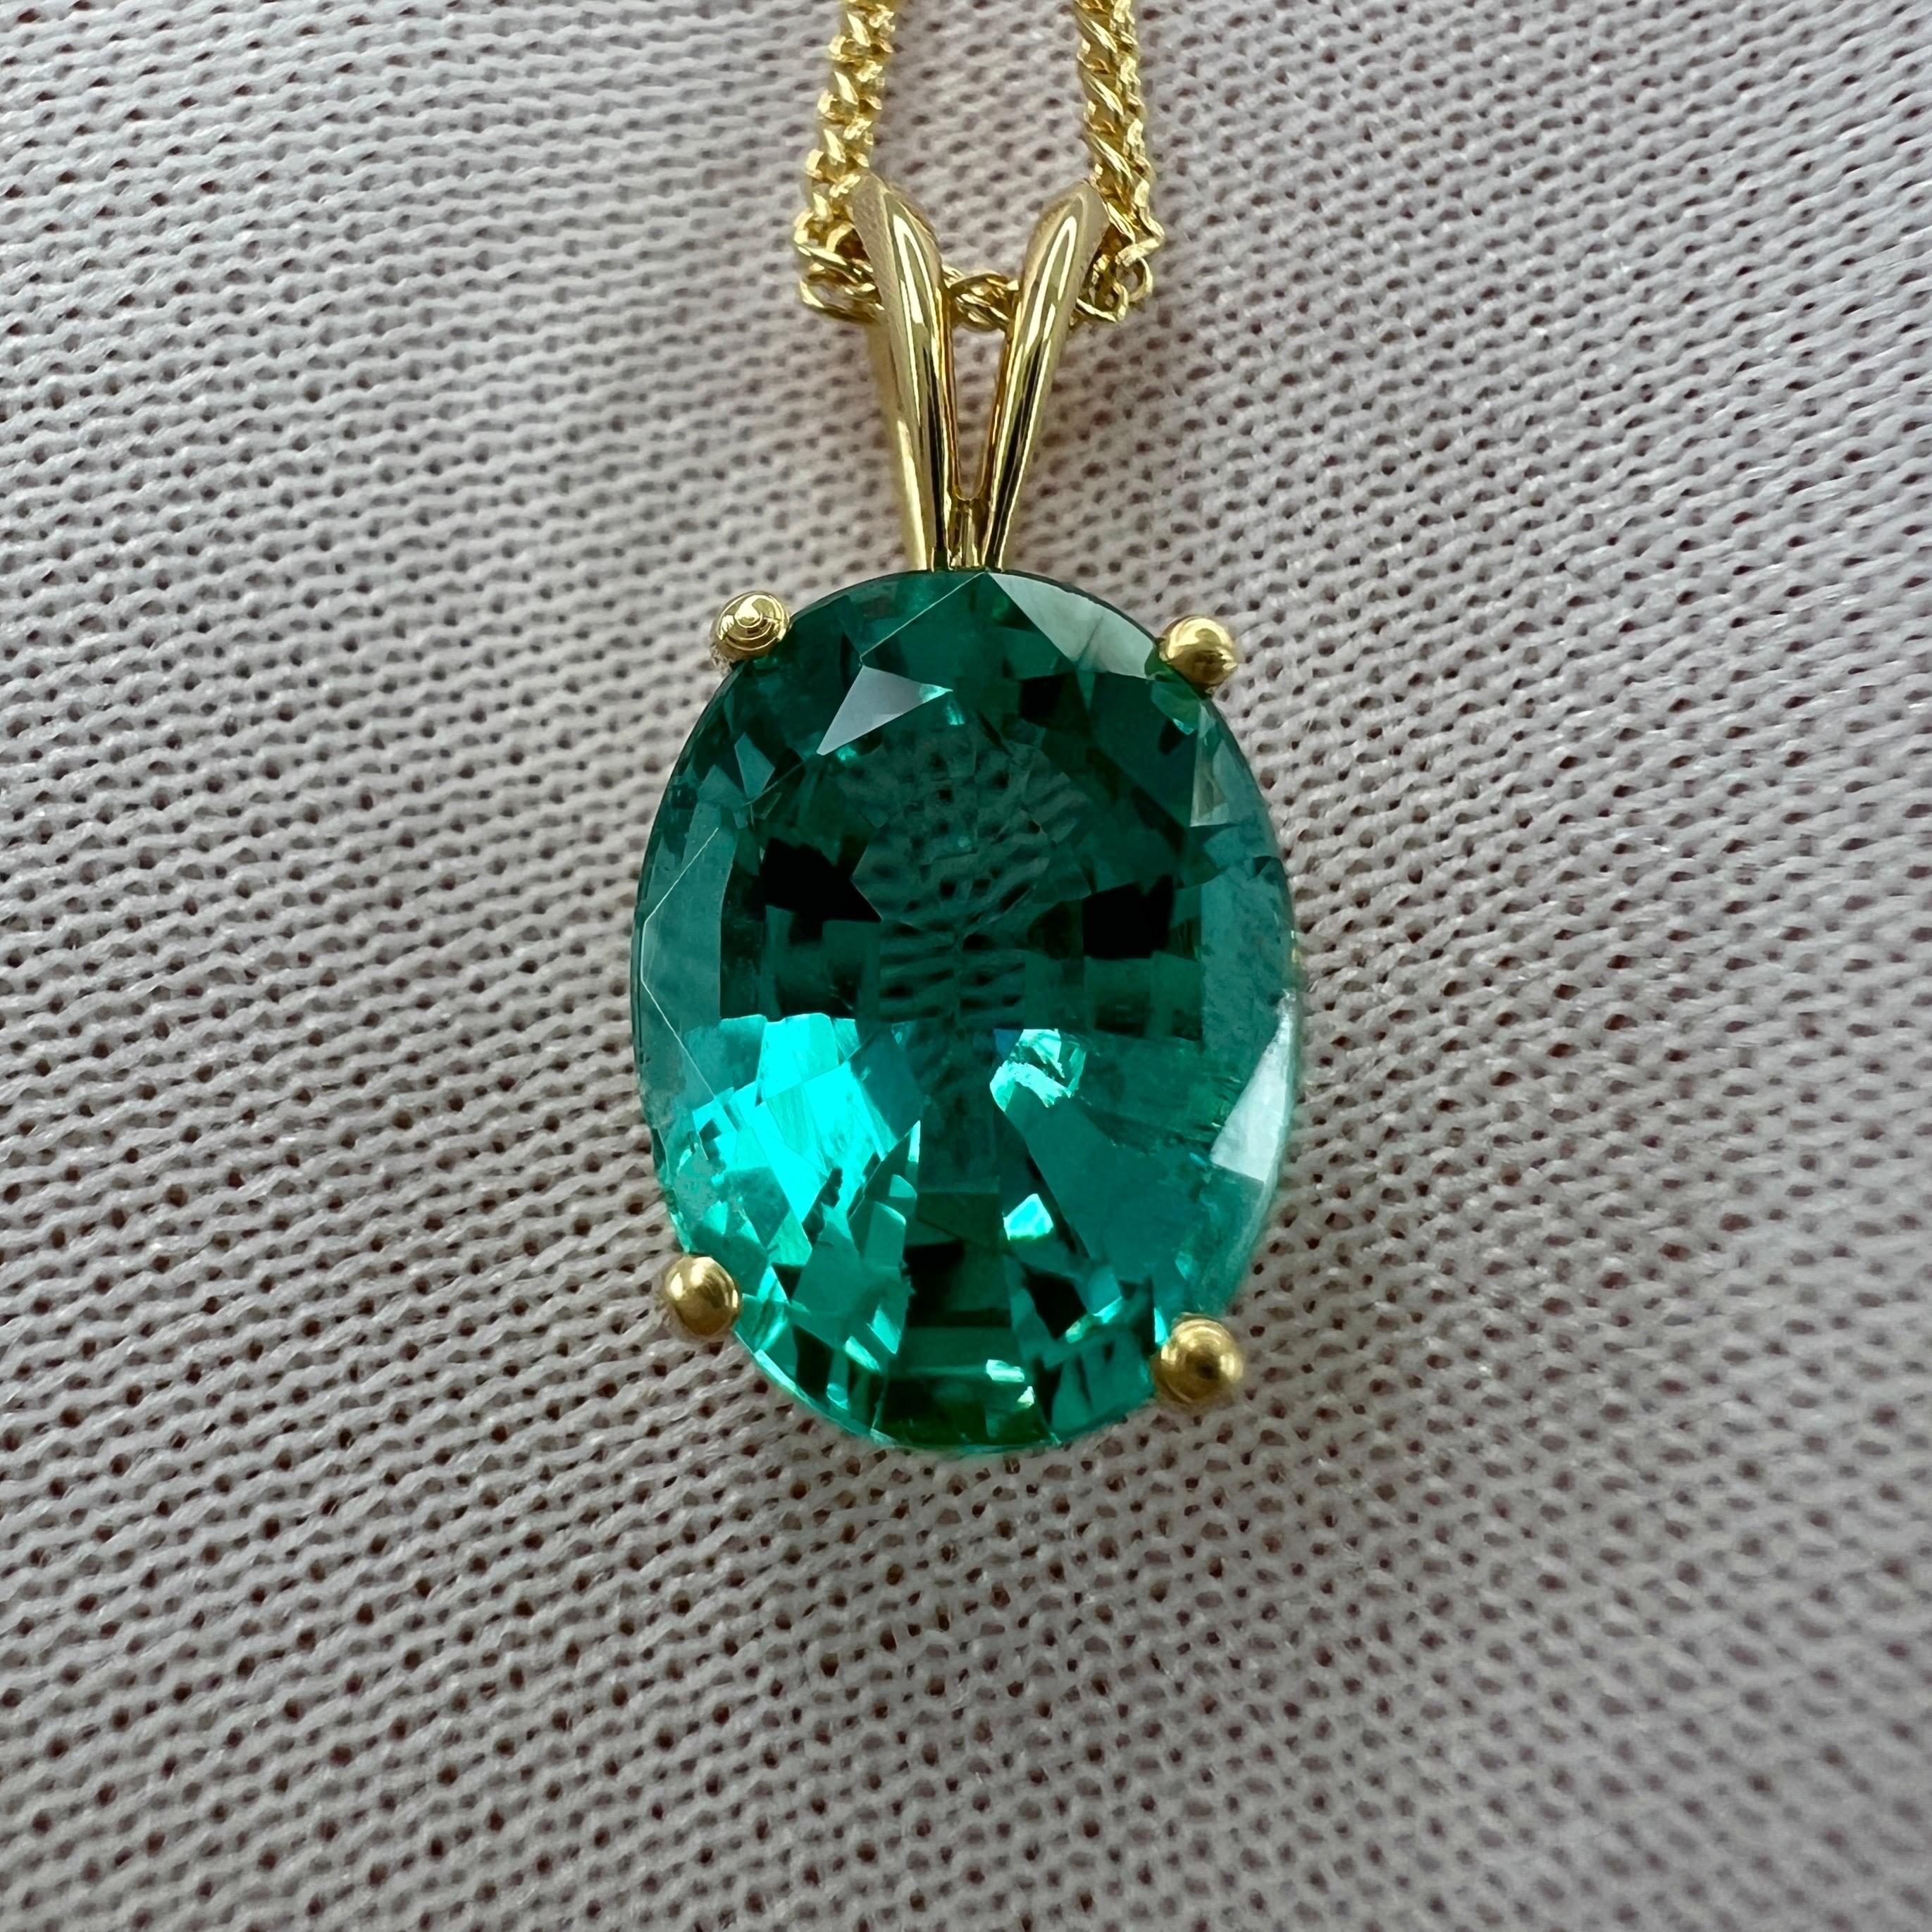 GIA Certified 2.95ct Vivid Blue Green Oval Cut Emerald 18k Gold Pendant Necklace For Sale 1